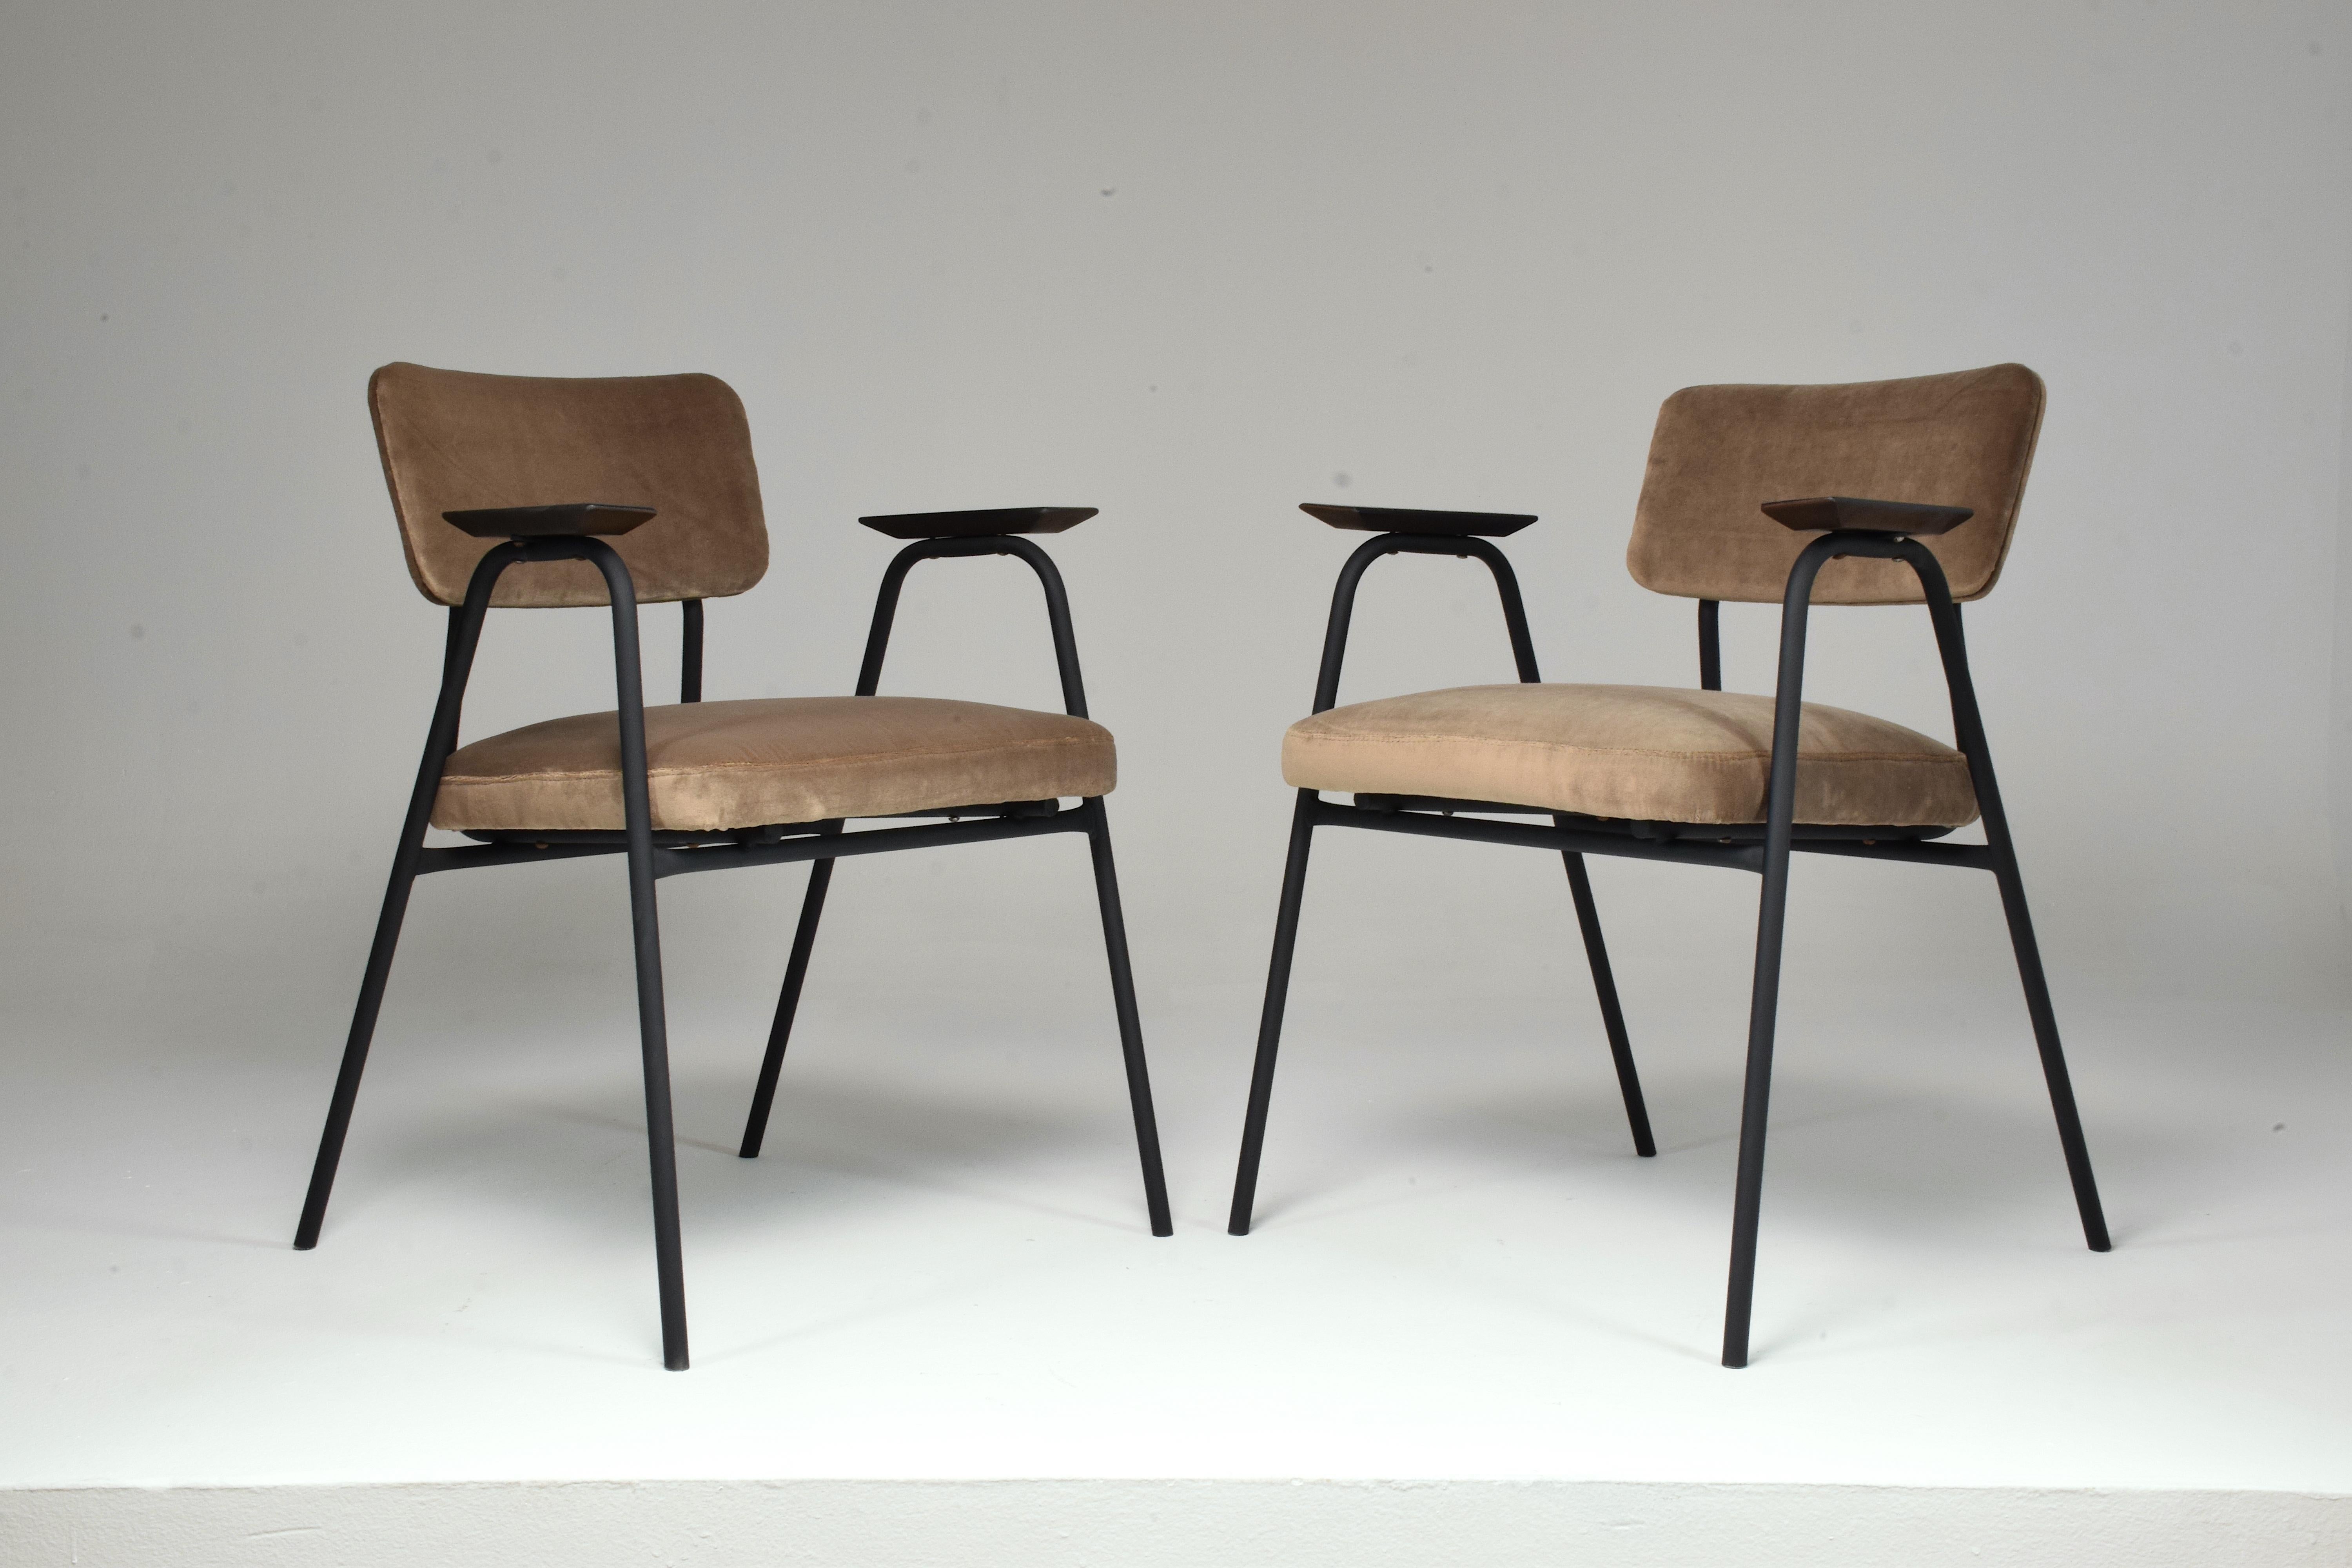 A fantastic set of chairs designed by the iconic Pierre Guariche for Meurop in the 1960's. The organic-shaped tubular structure is made of black matt re-lacquered steel with tinted black oak armrests. Fully restored in a light ash brown velvet